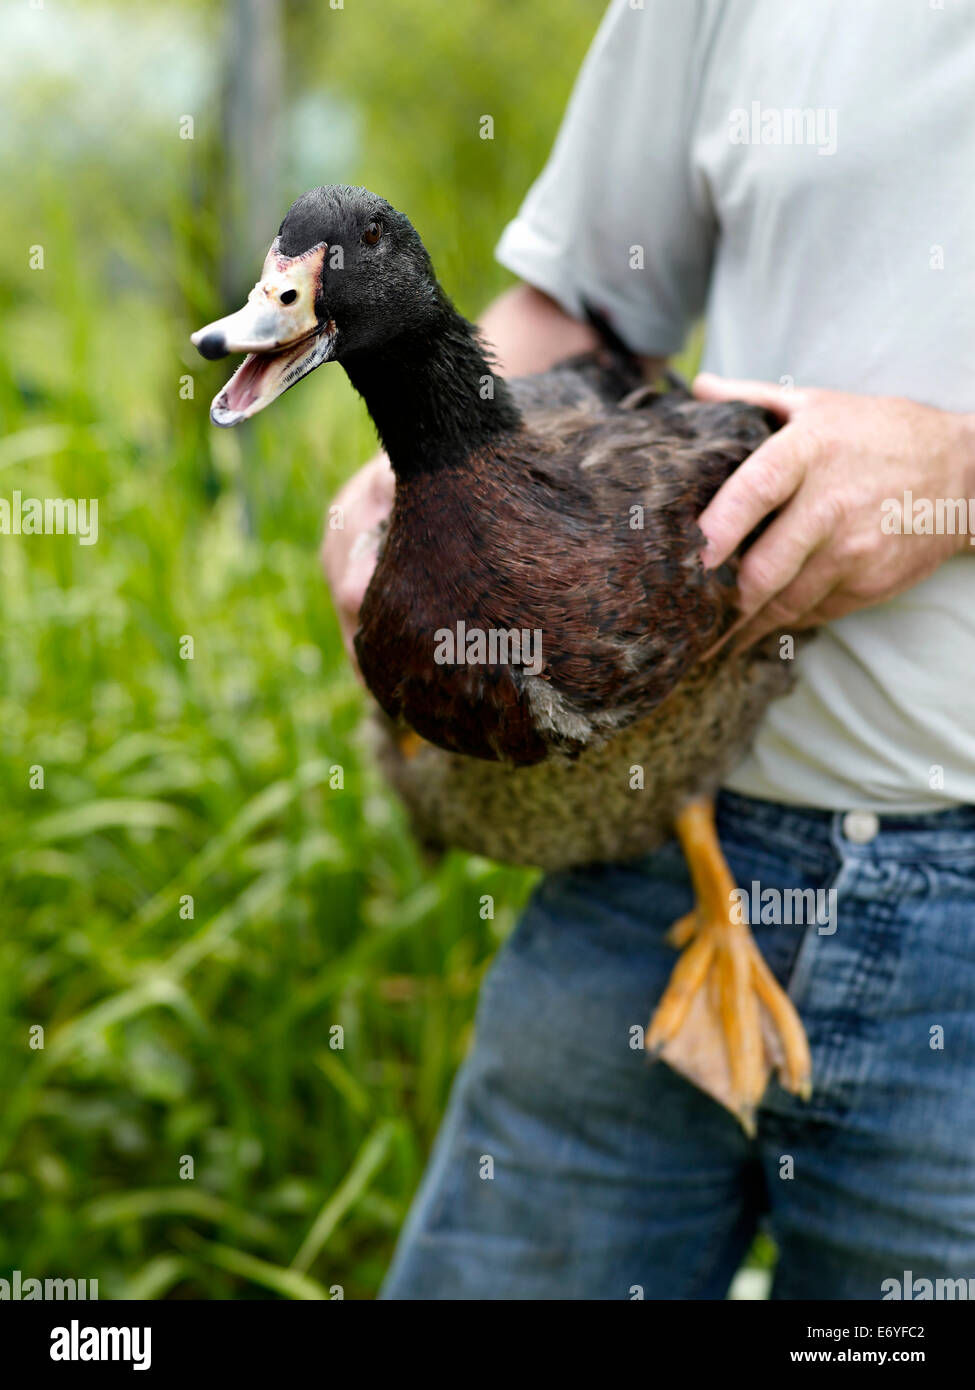 Man holding a live duck Stock Photo